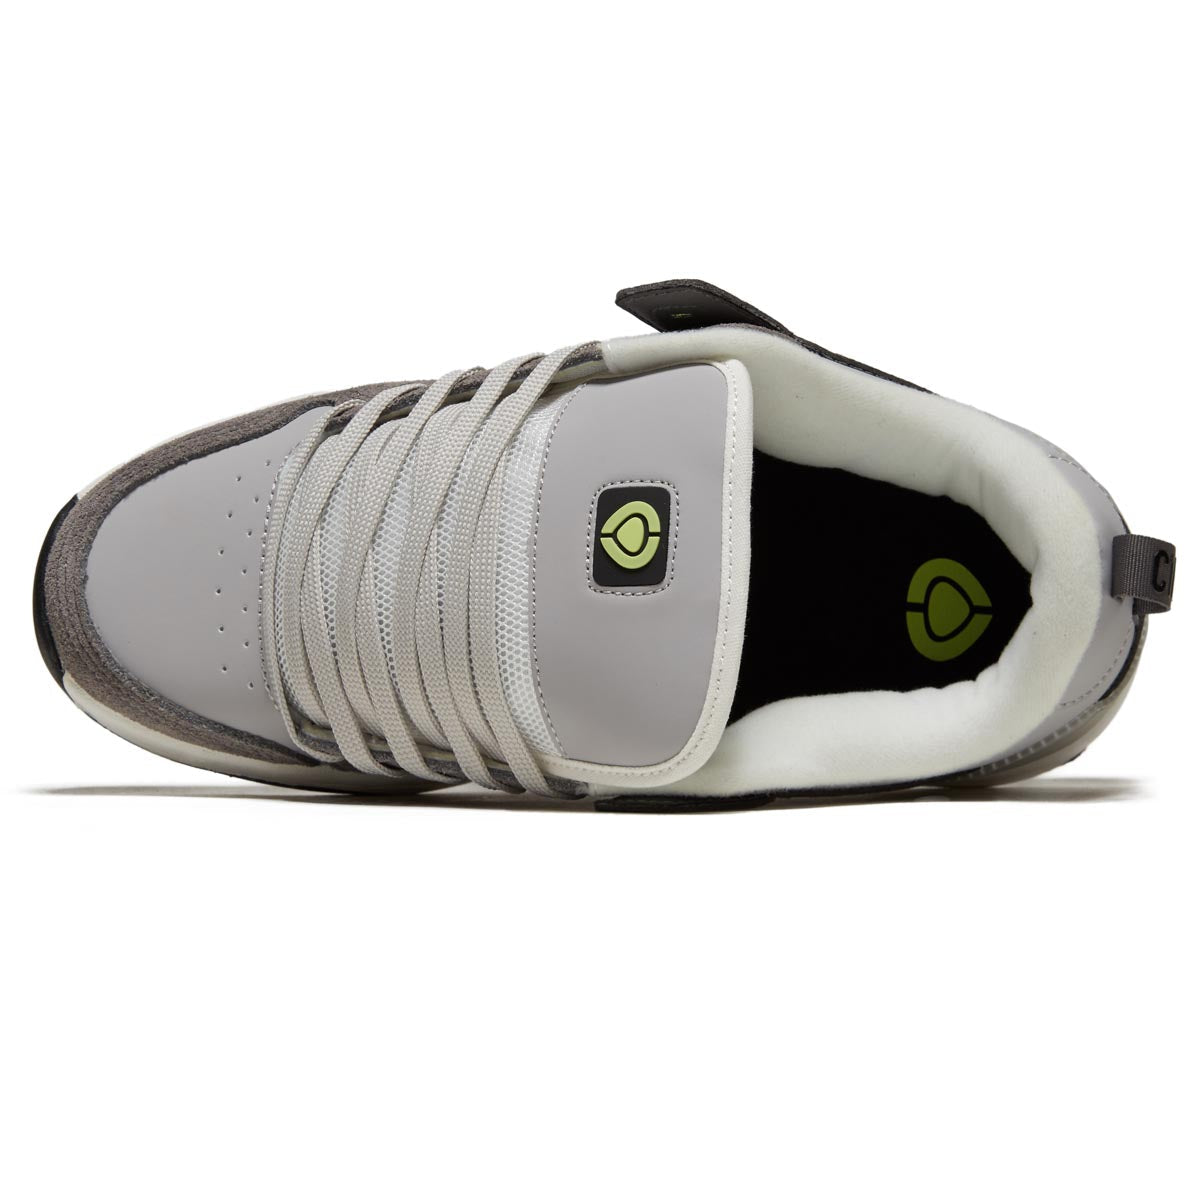 C1rca Tave TT Shoes - Grey/Black/Lime Green image 3